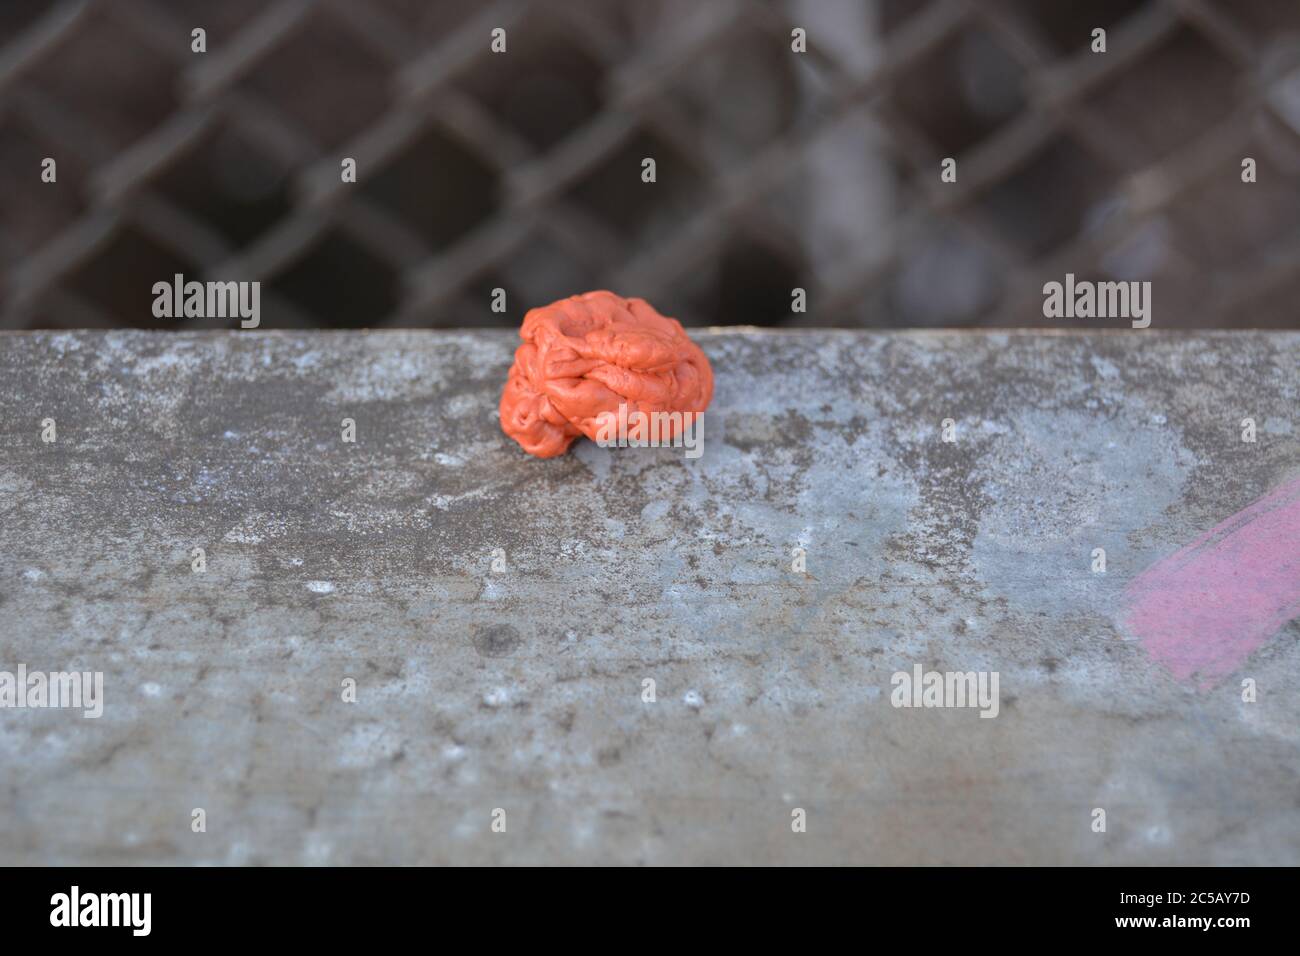 Orange chewing gum on the ground of the street. Environment.Discarded Chewing gum close up Stock Photo